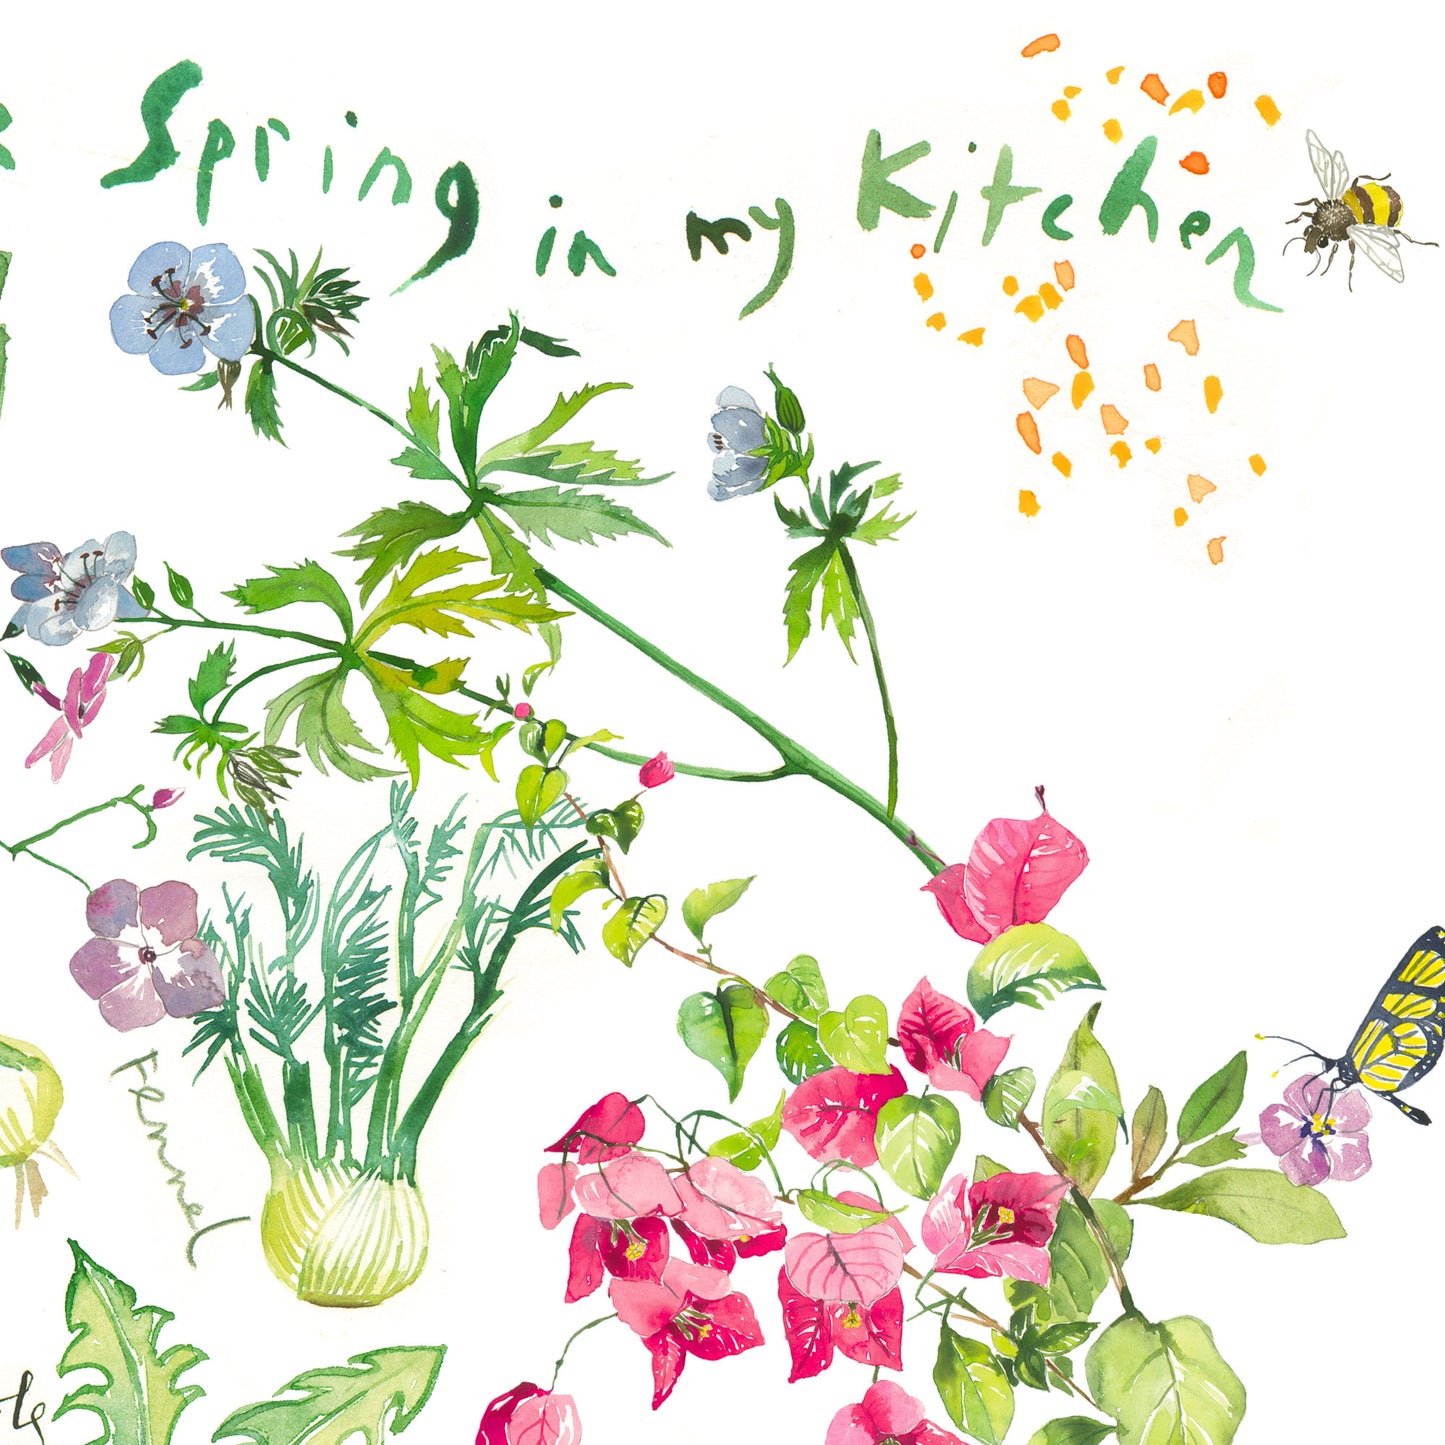 Spring flowers and vegetables